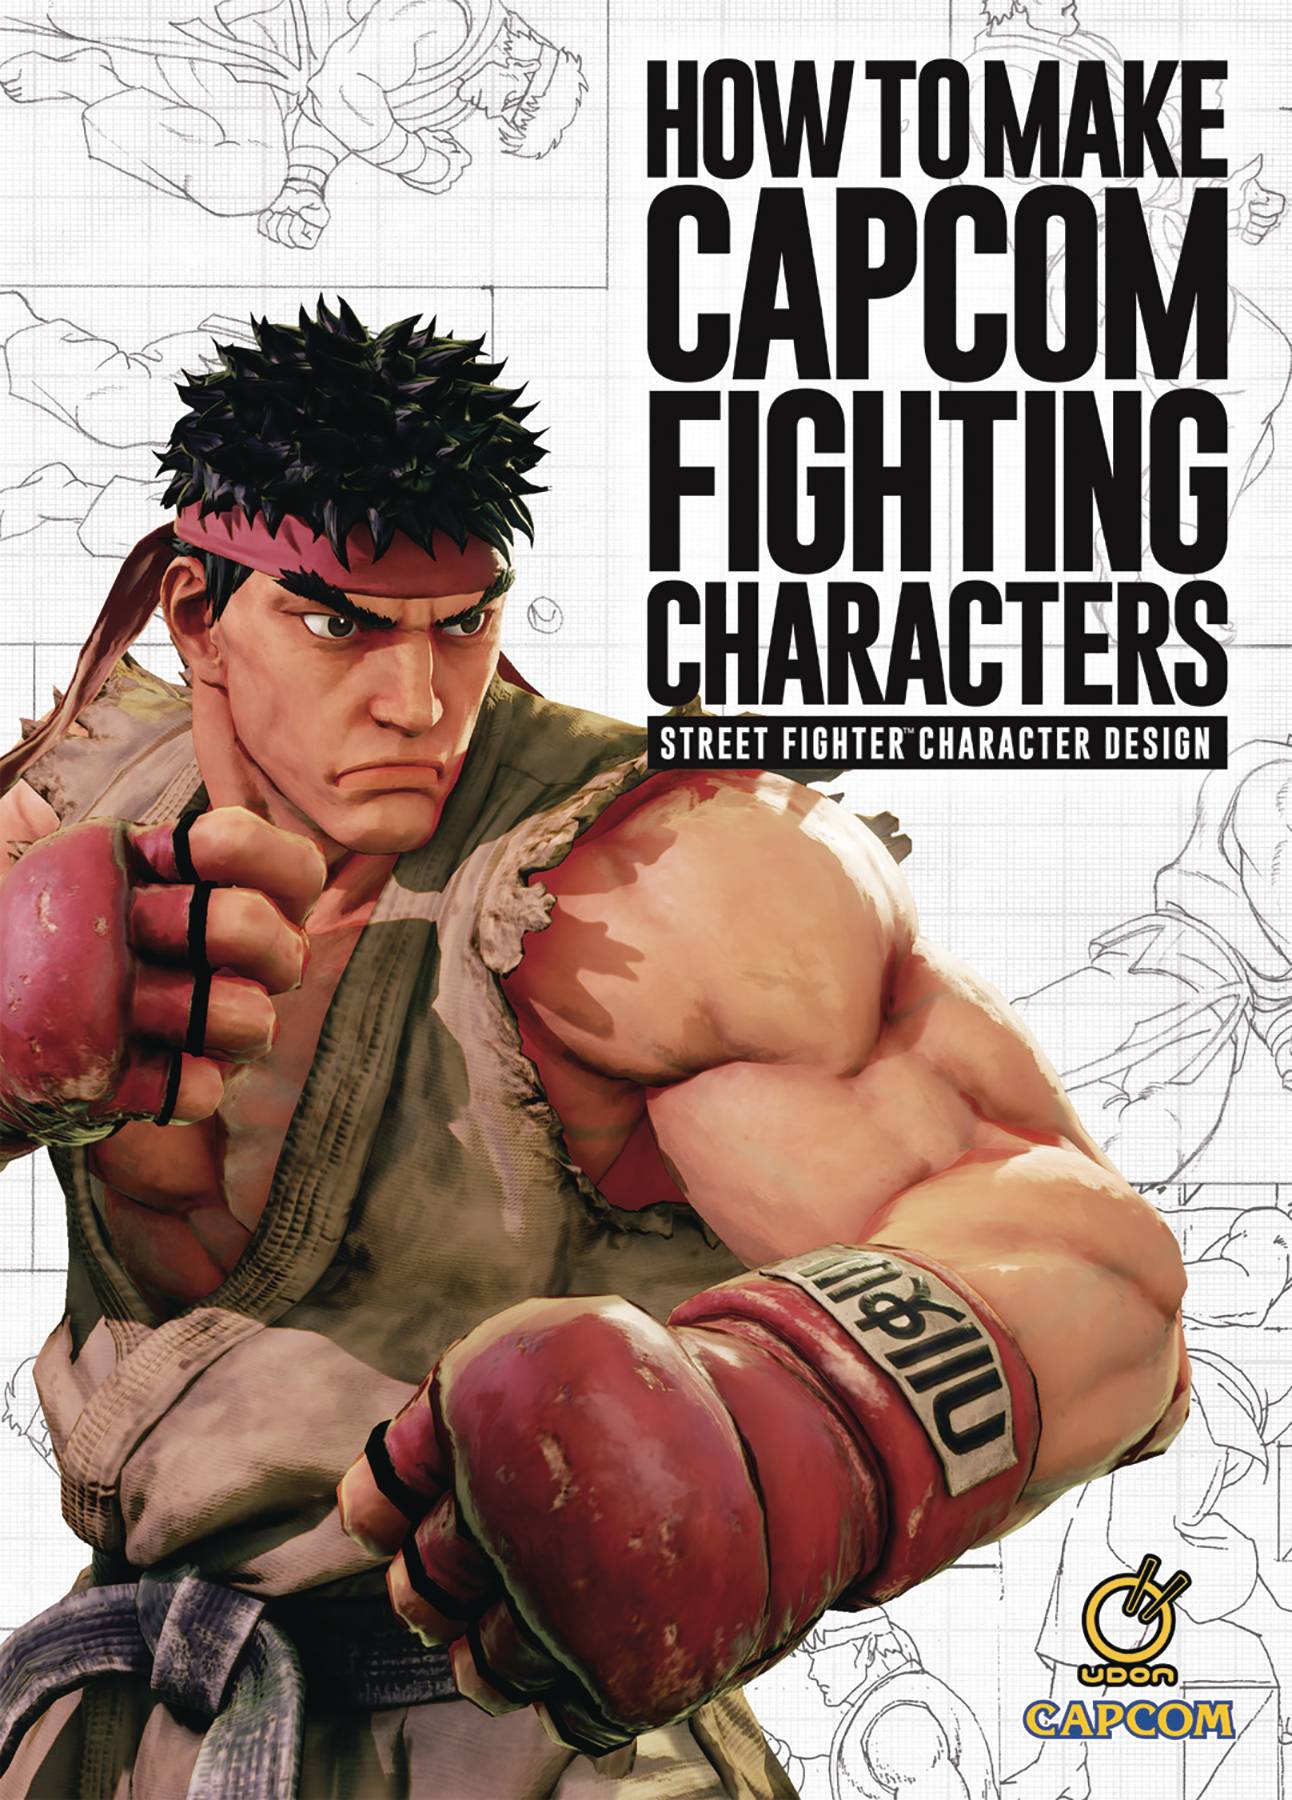 HOW TO MAKE CAPCOM FIGHTING CHARACTERS HC